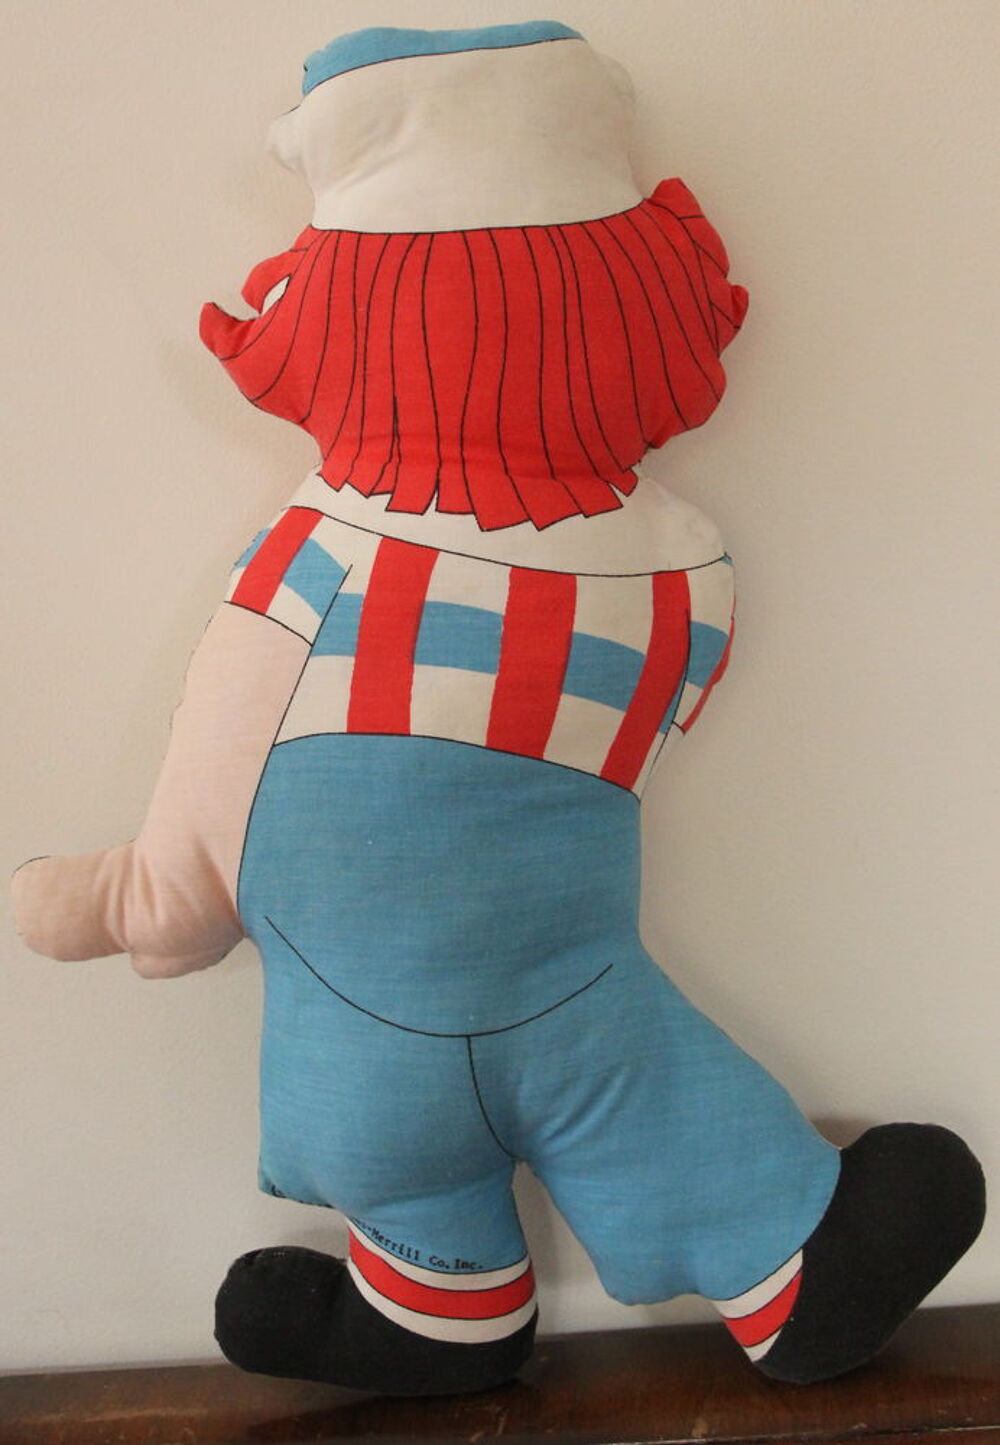 Bobbs Merrill Raggedy Andy vintage 1978 Jeux / jouets